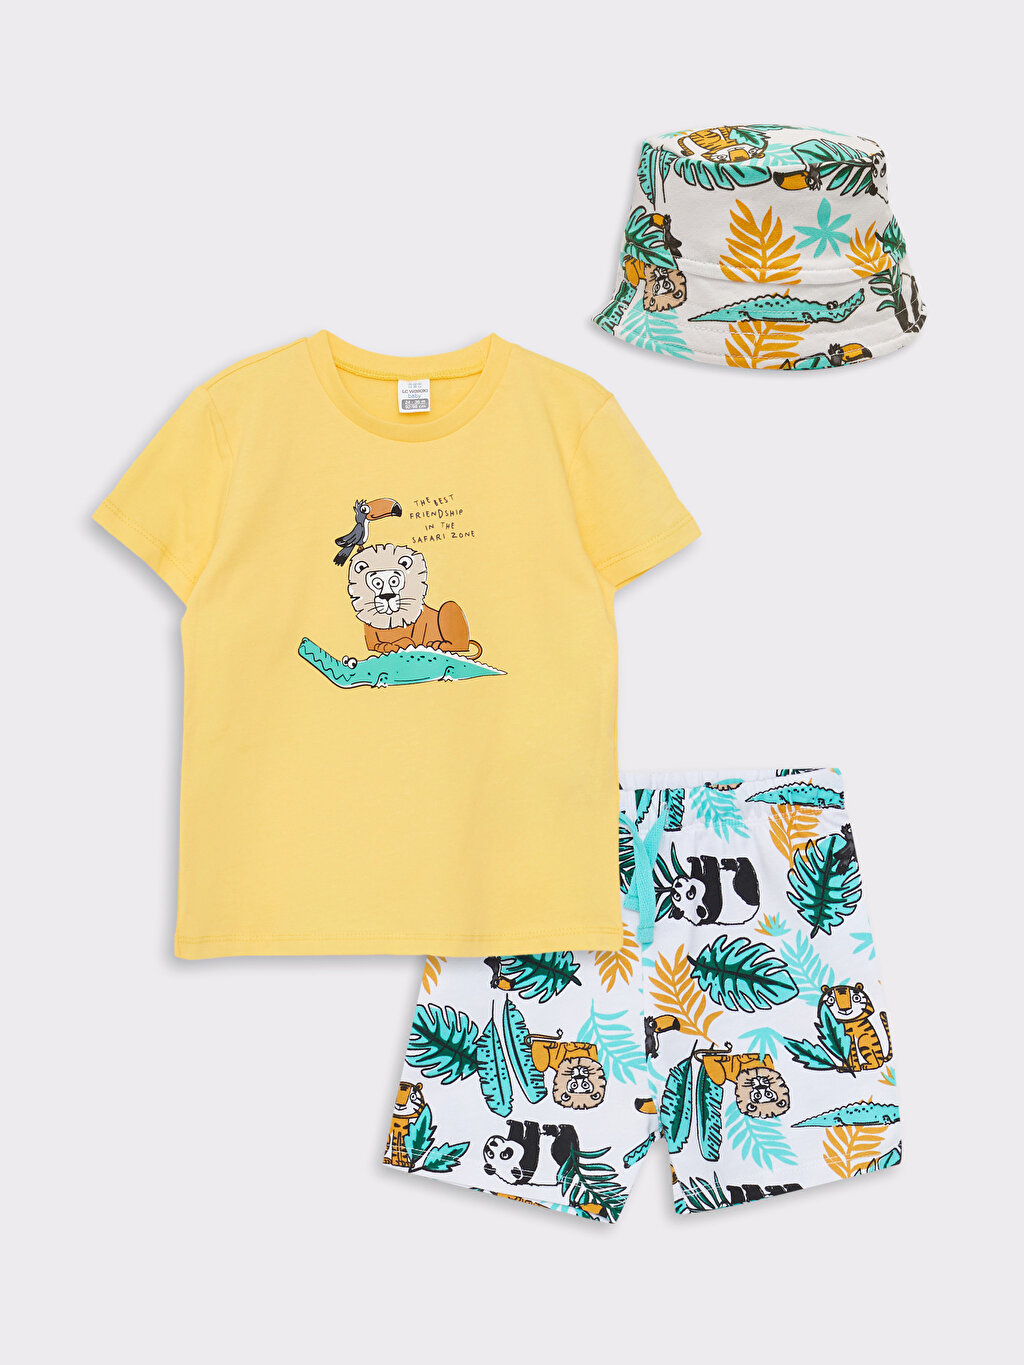 Crew Neck Short Sleeve Printed Cotton Baby Boy T-Shirt Shorts and 